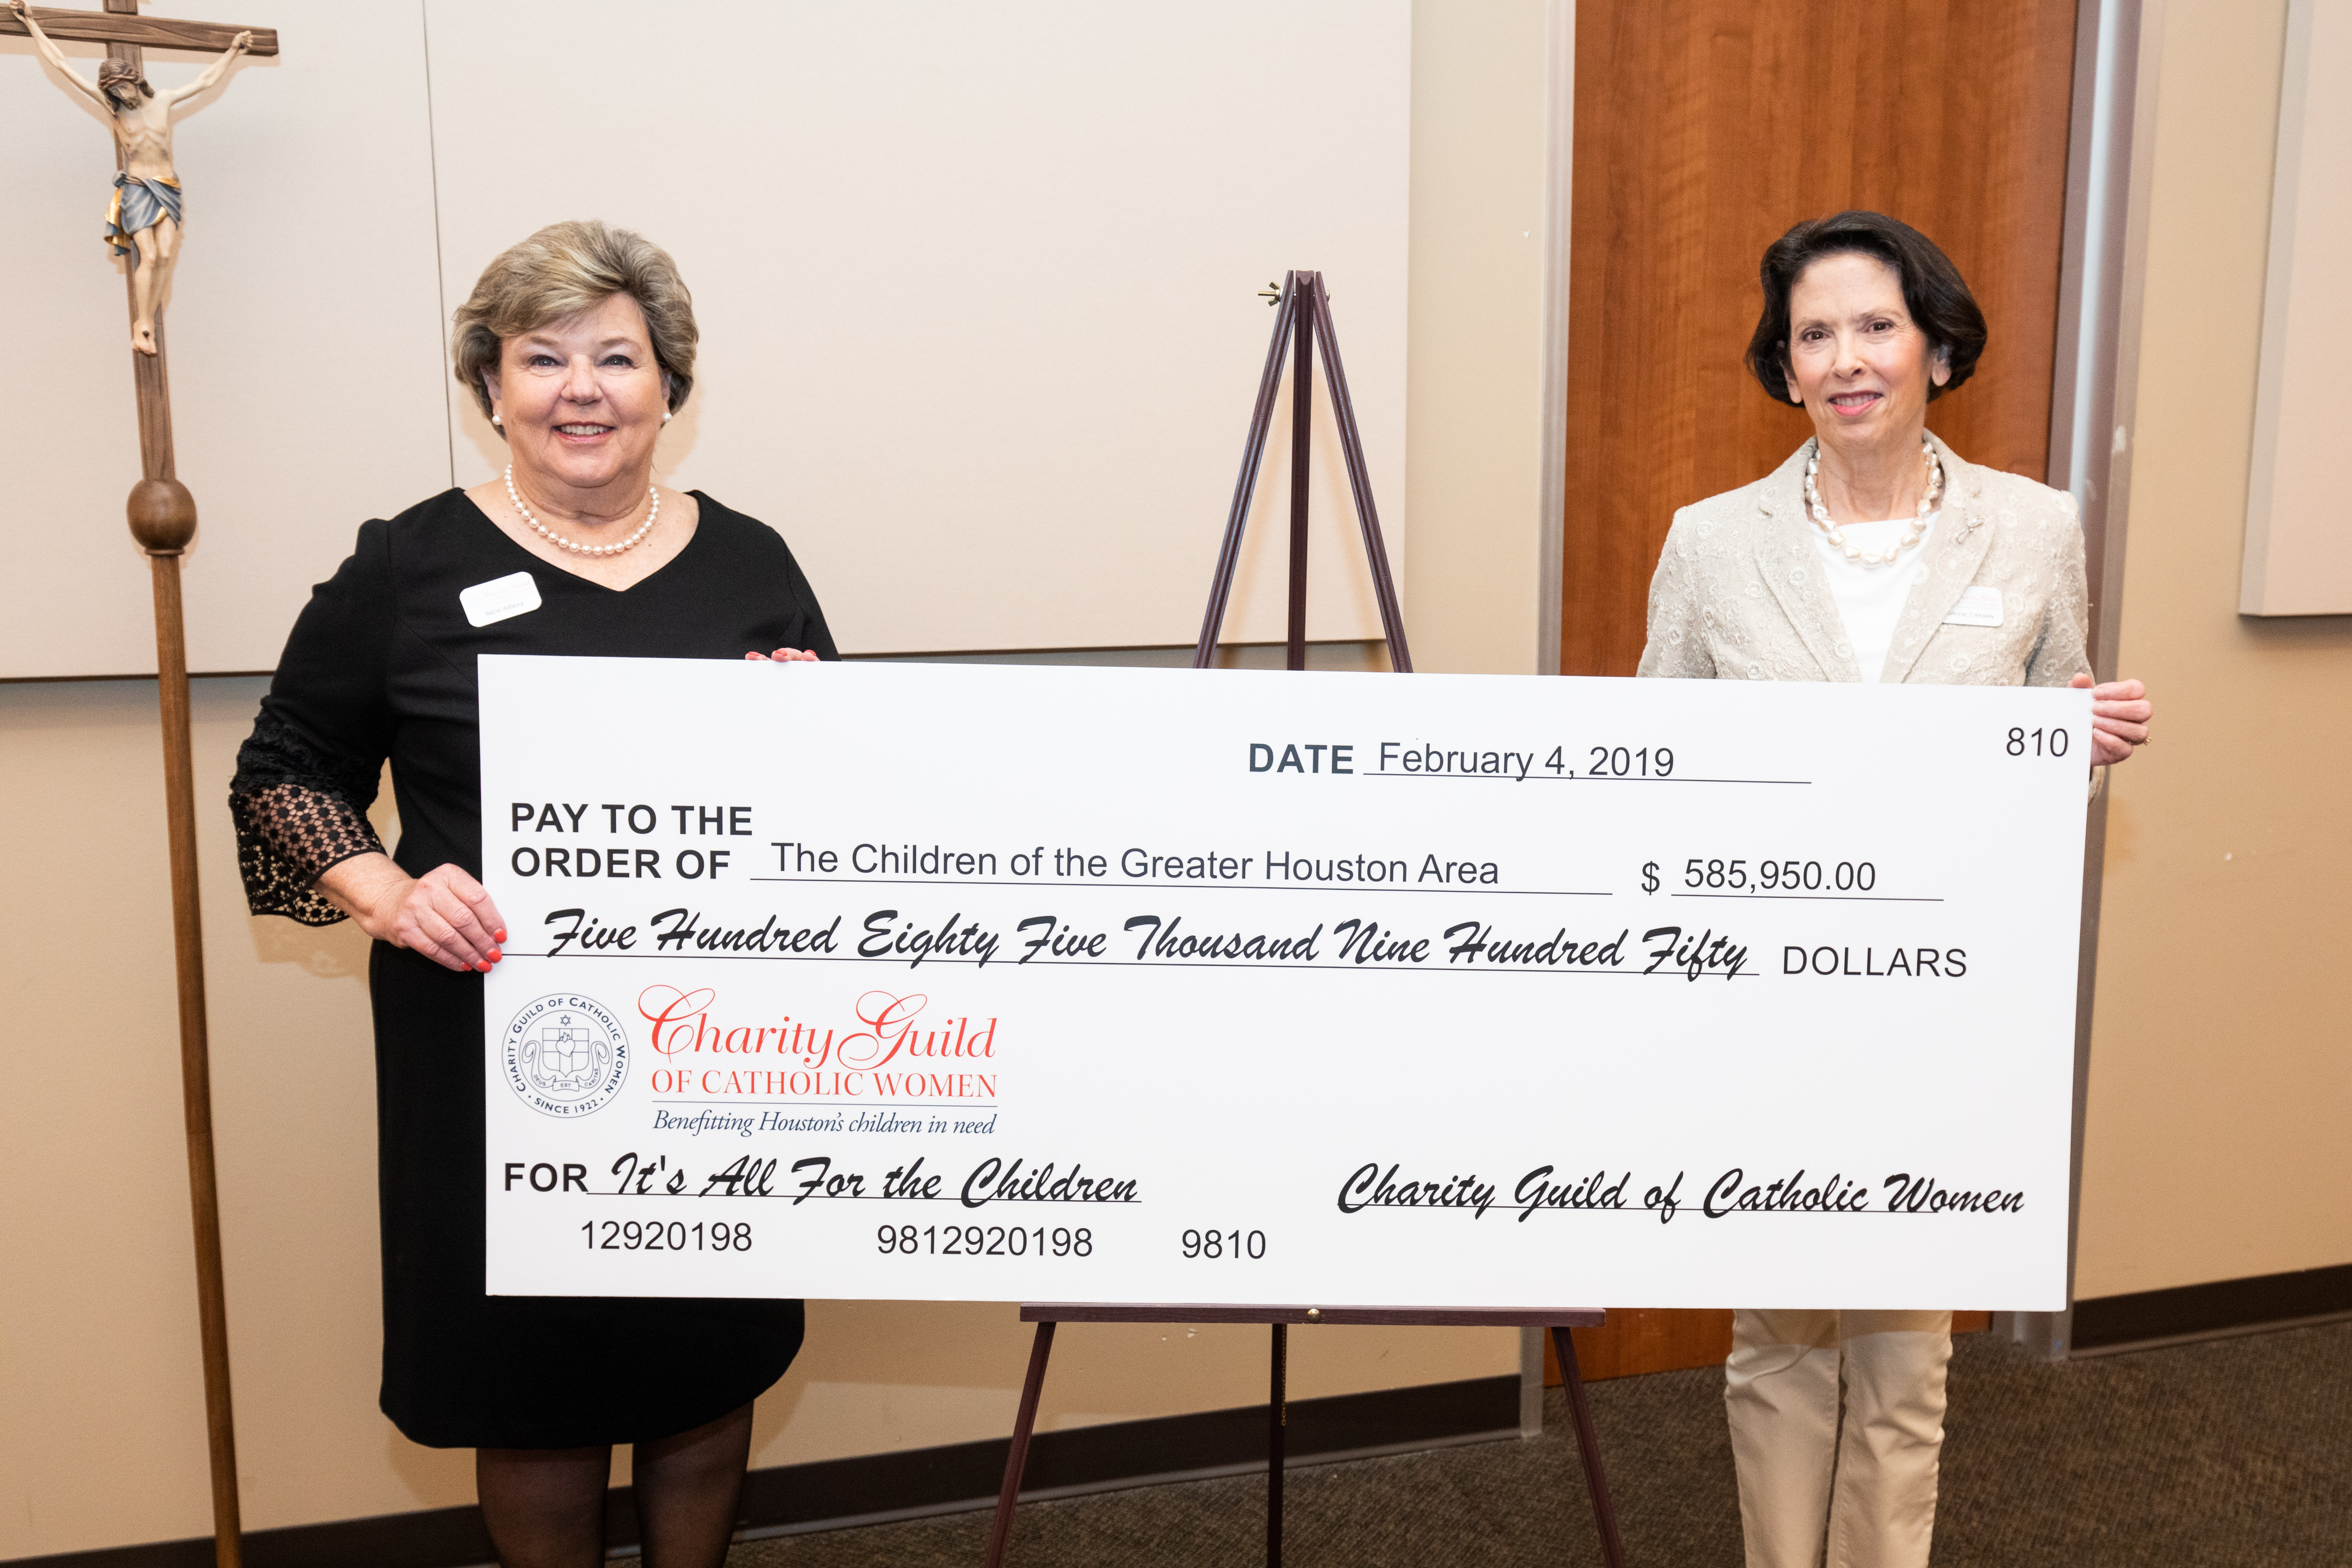 Charity Guild of Catholic Women, Houston, awarded nearly $600,000 in grants to support children's services charity organizations, Monday, February 4, 2019 at the Charity Guild Shop.